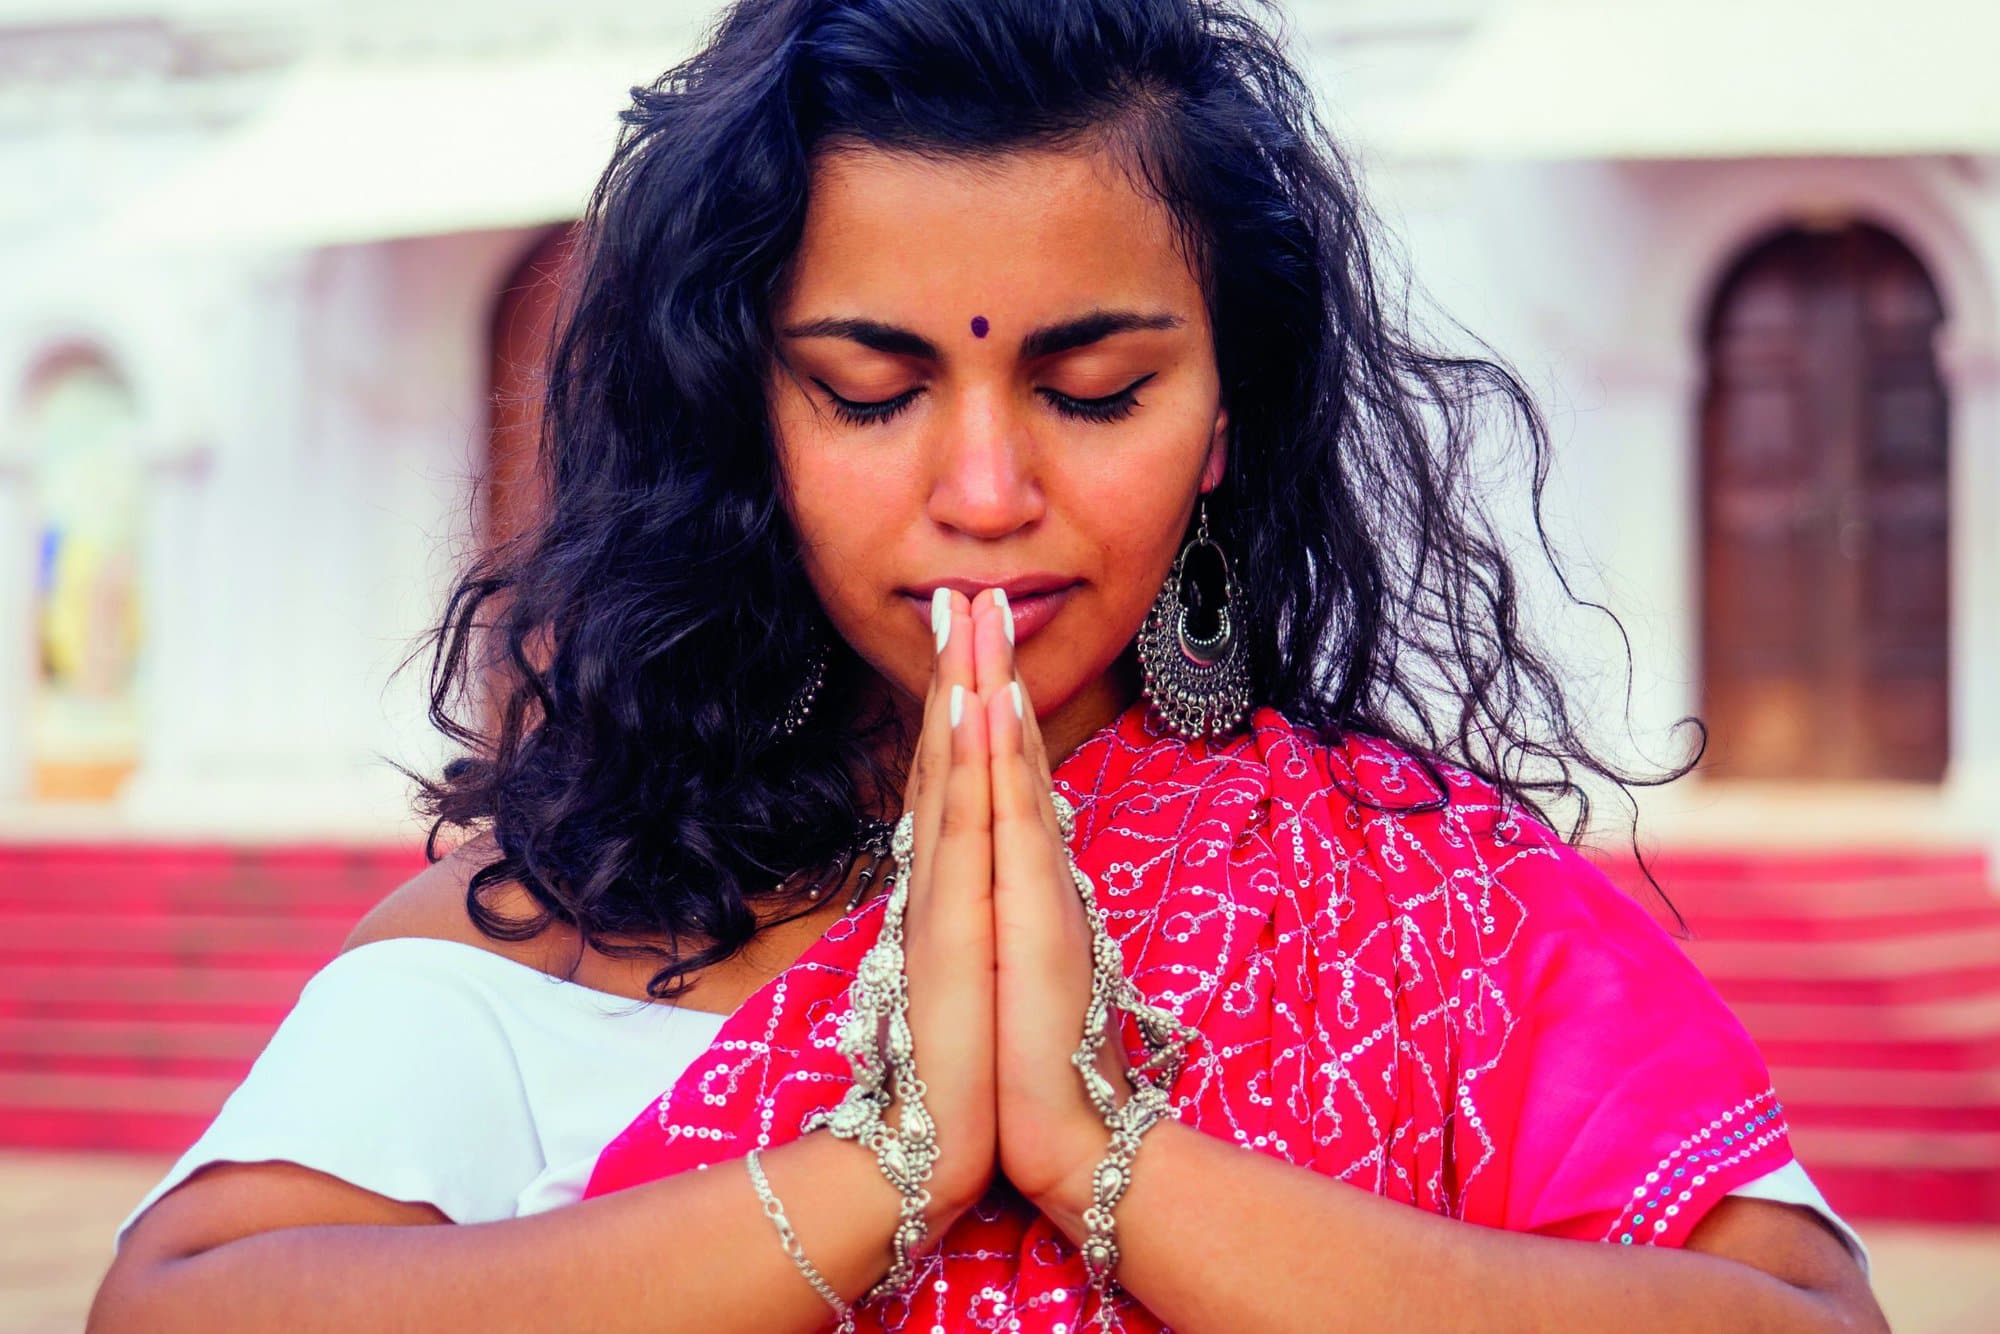 Young Indian woman in traditional sari red dress praying in a hindu temple goa india Hinduism.girl performing namaste gesture catholicism Delhi Street holi festival.om yoga meditation female model